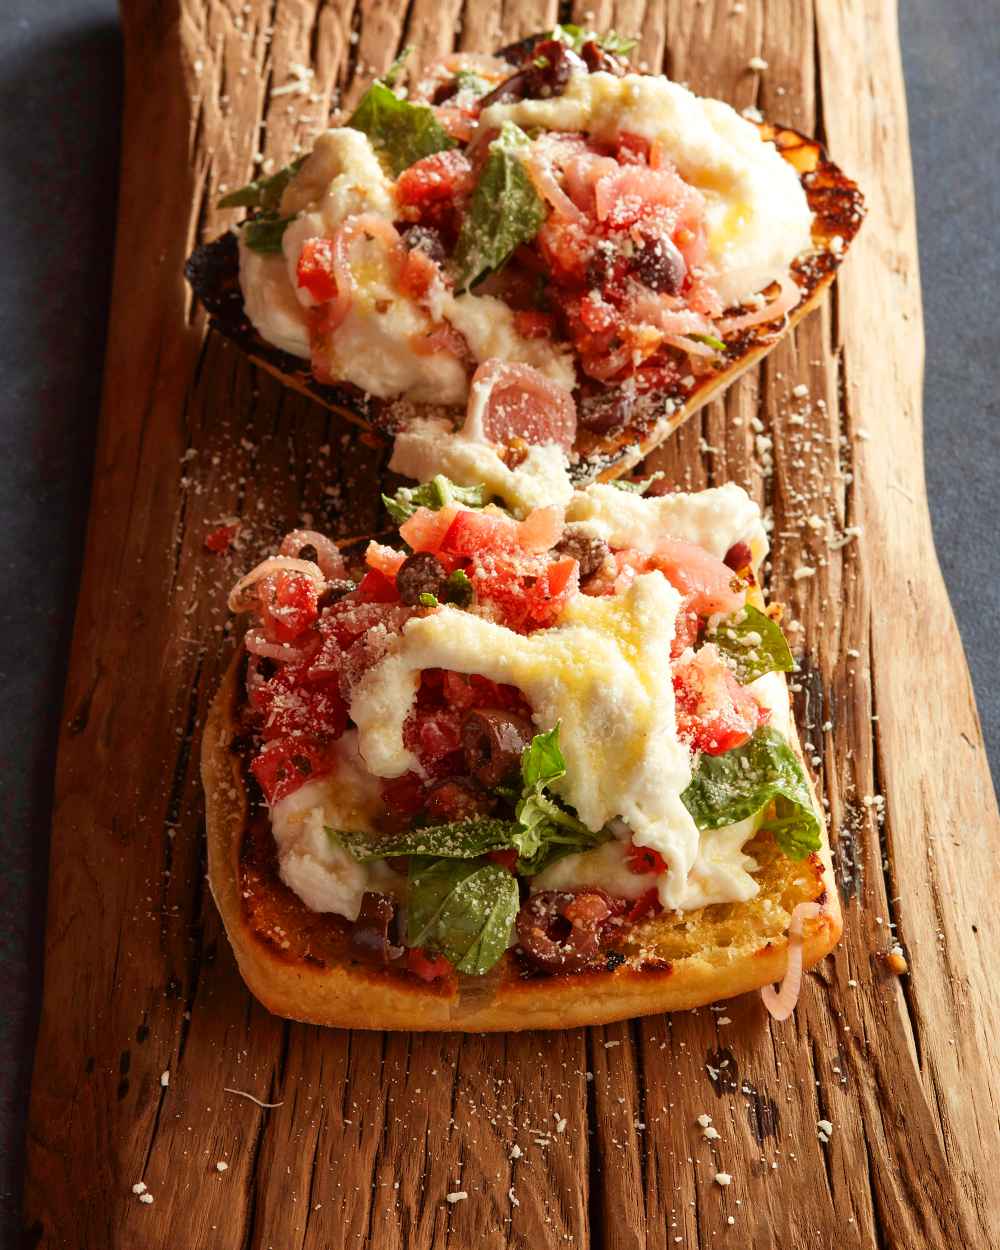 Toasted Bruschetta Recipe That Goes ‘With Anything